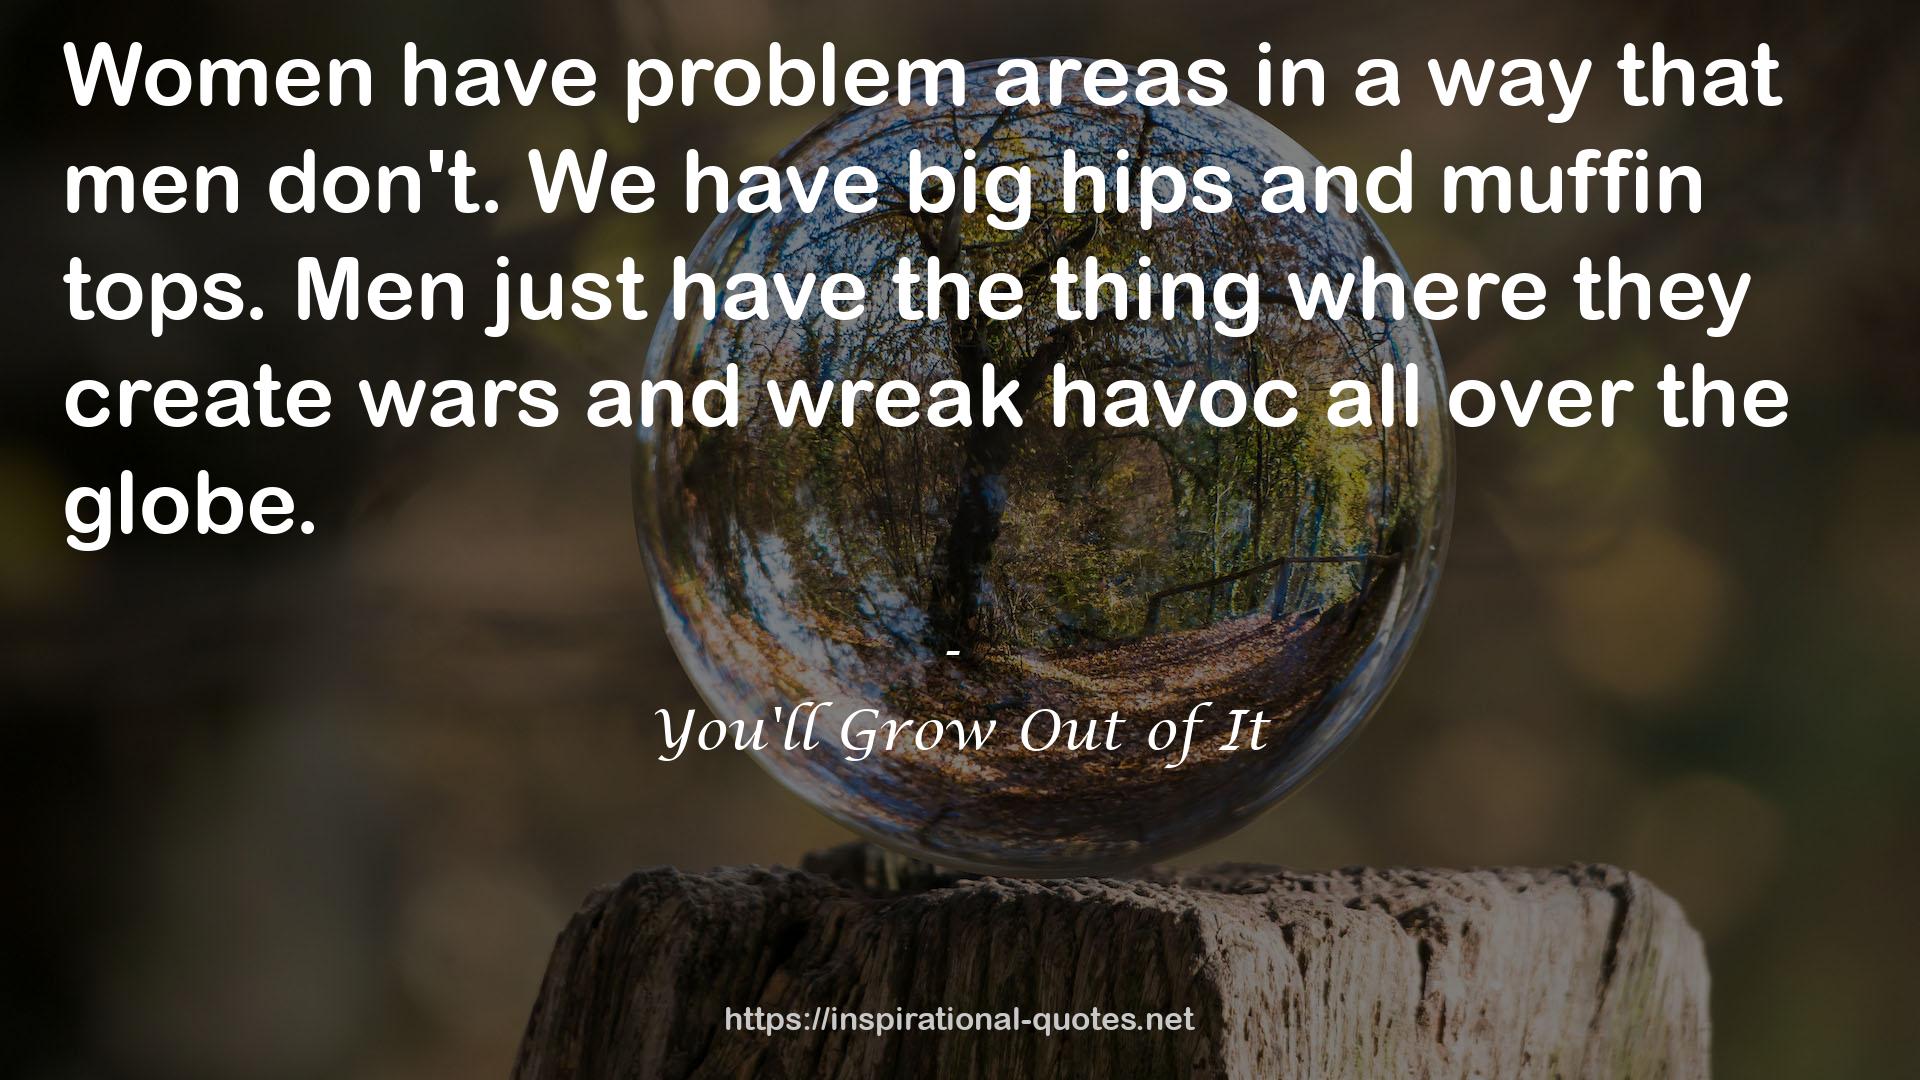 You'll Grow Out of It QUOTES